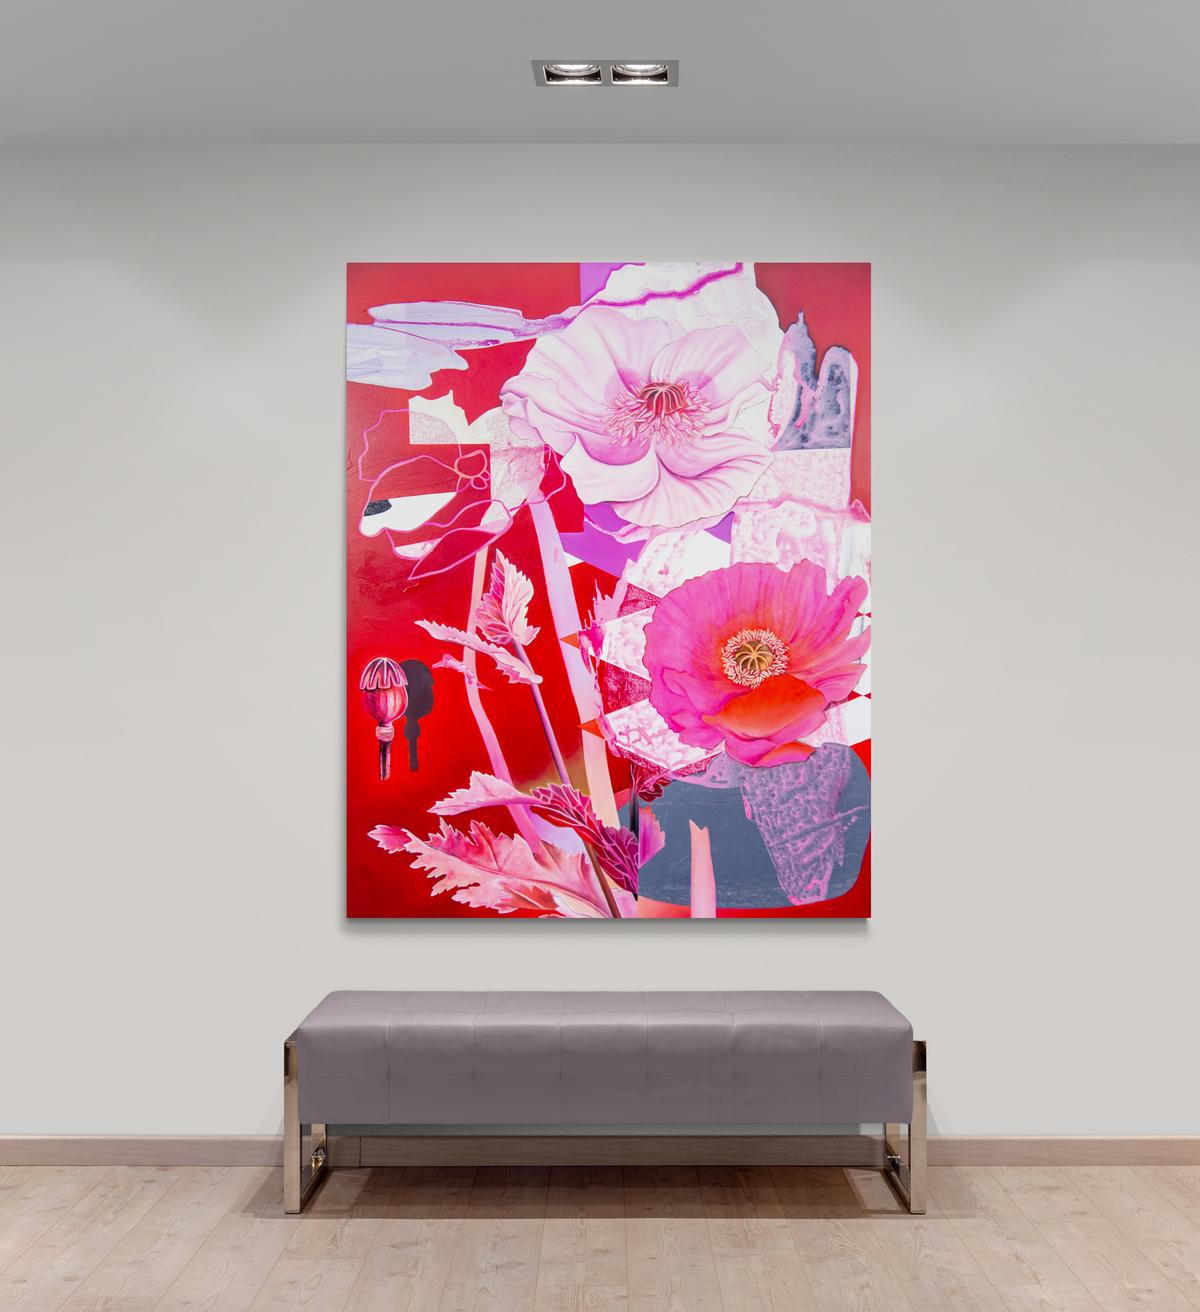 With Dream Flower, Fiona Ackerman has painted a gorgeous ethereal abstract arrangement of brilliant pink, purple, mauve, orange flowers and organic shapes against a background of vibrant red. The Vancouver-based artist was inspired to create a new